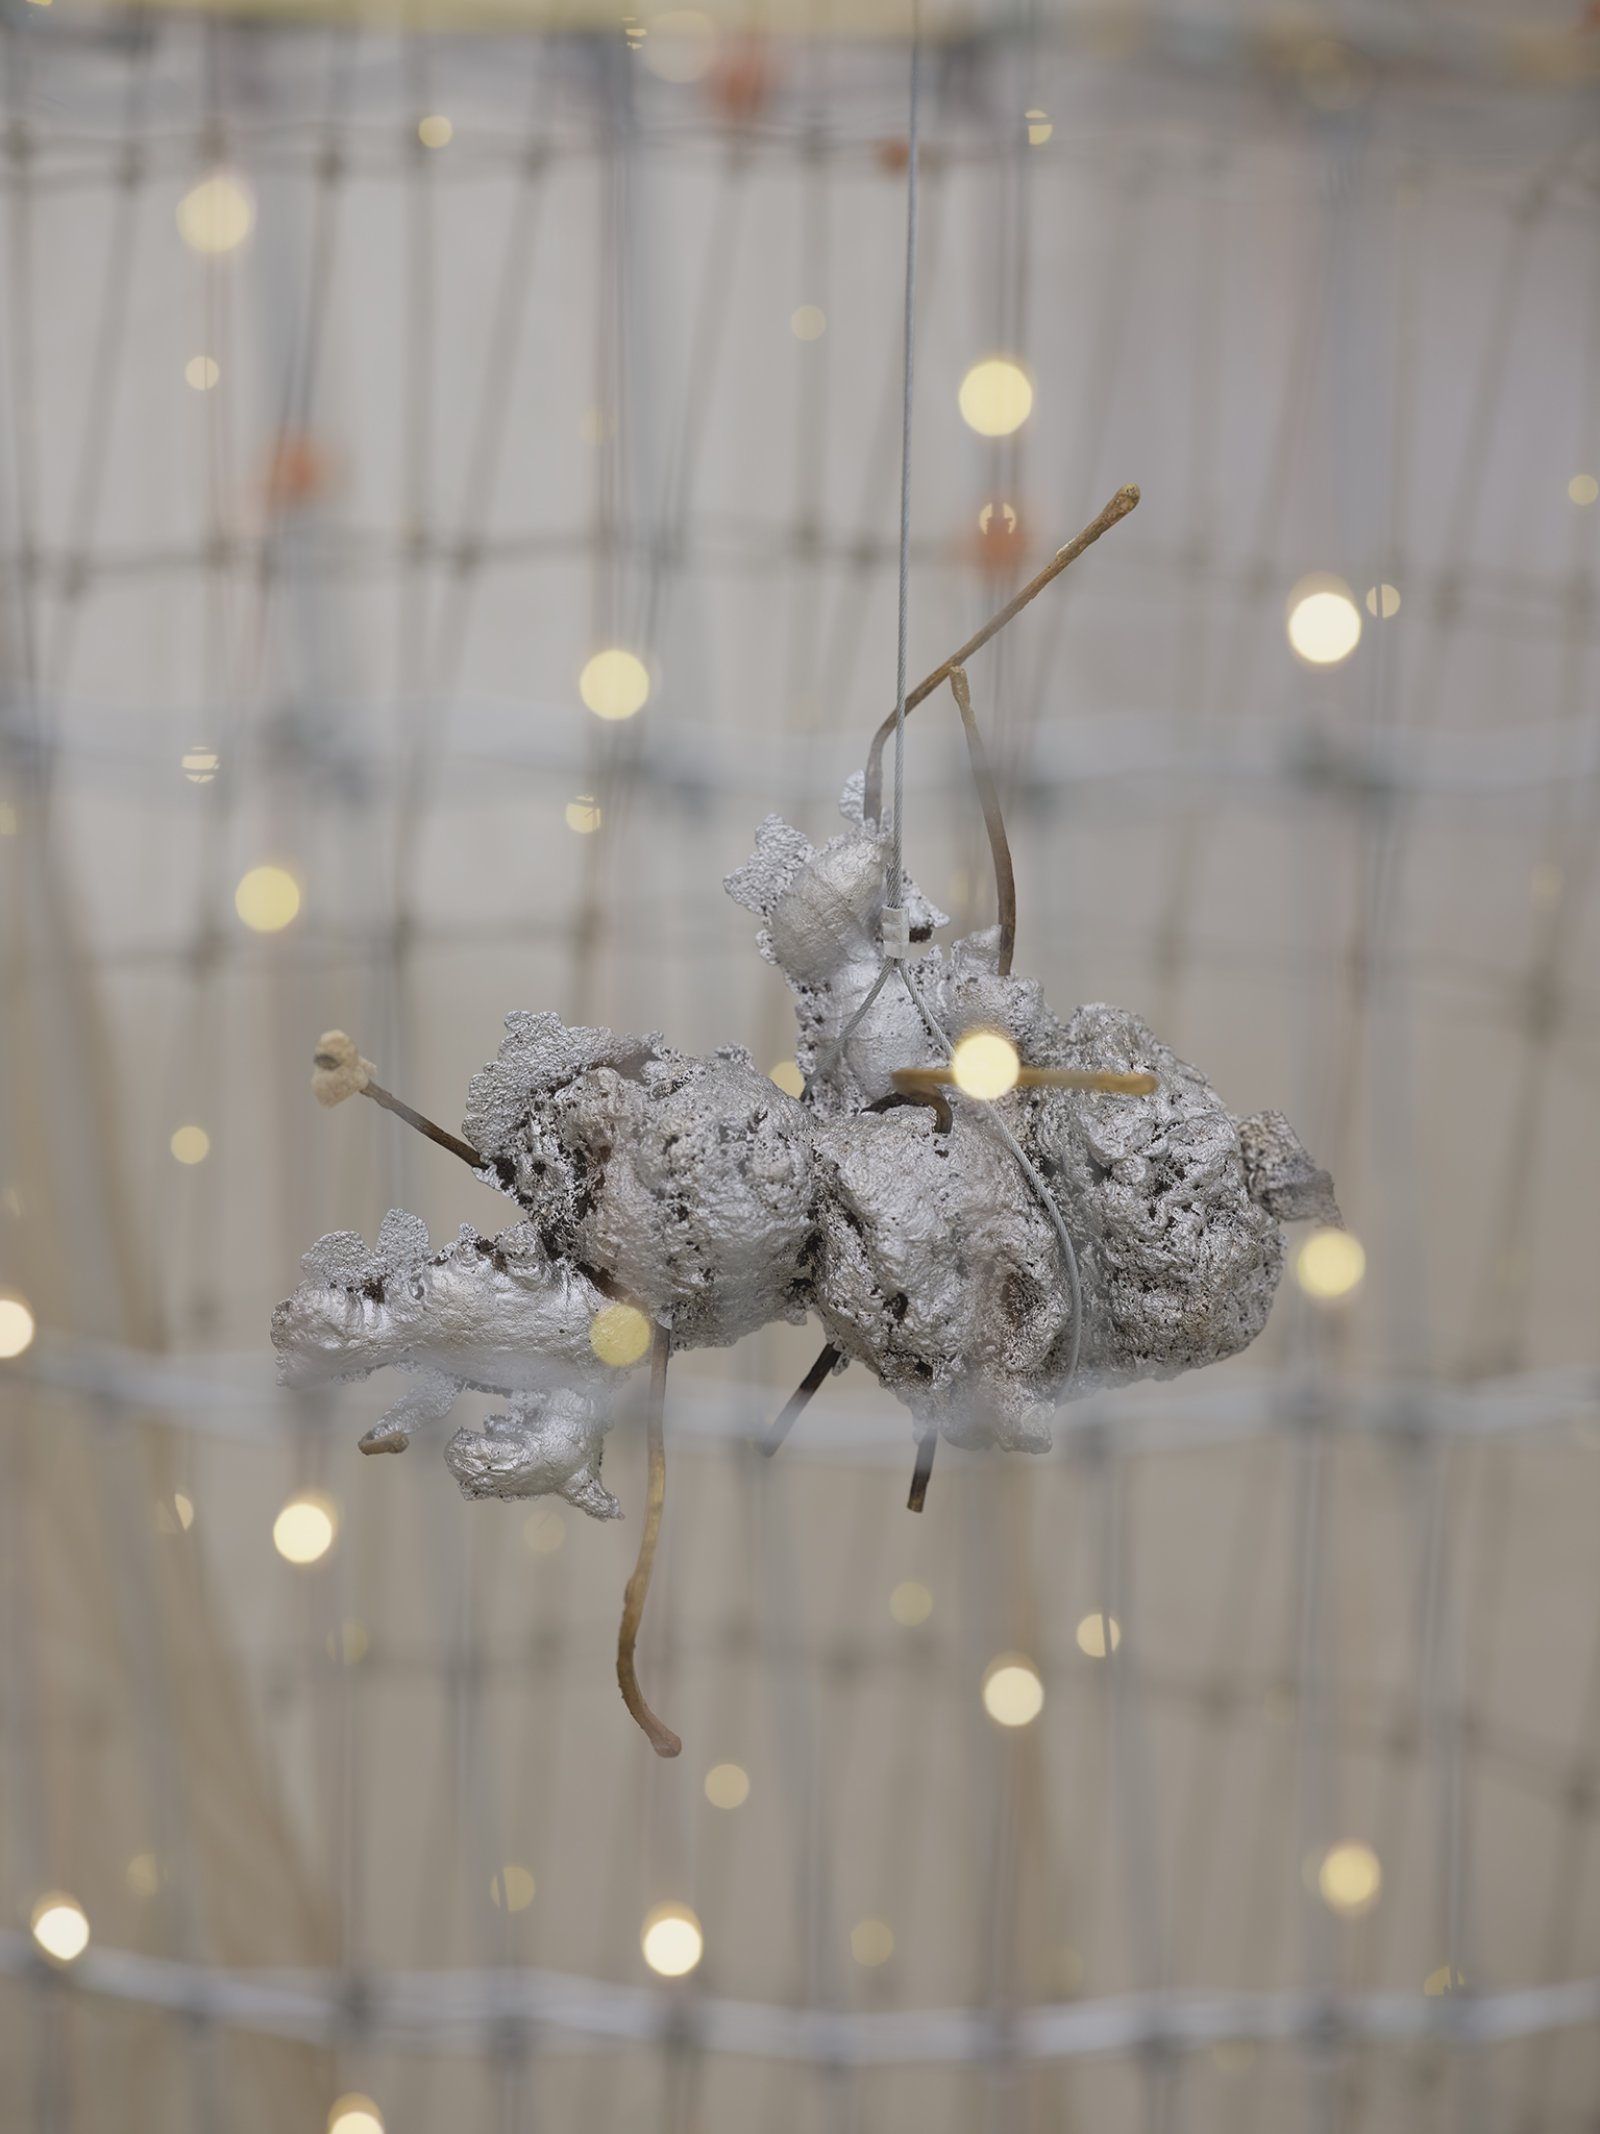 ​​Rochelle Goldberg, Trigger: Towards everything they’ve ever wanted (detail), 2019, ranch fencing, batteries, fairy lights, polyester curtain, aluminum, cast bronze matches, copper wire, 51 x 51 x 44 in. (130 x 130 x 112 cm)​ by Rochelle Goldberg